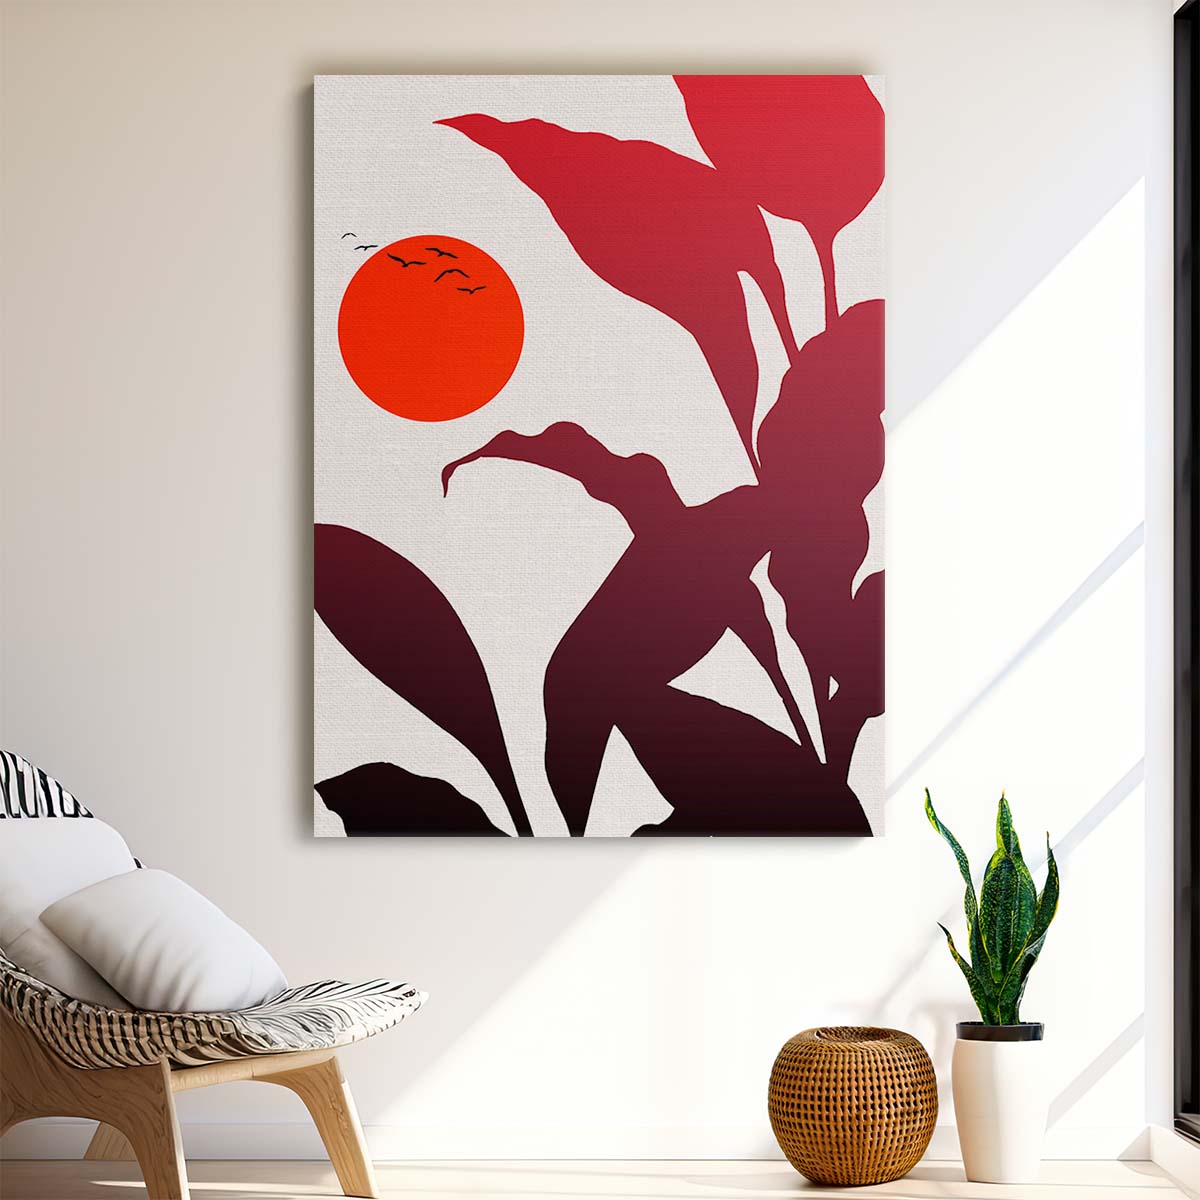 Exotic Tropical Sunset Illustration with Birds and Botanical Elements by Luxuriance Designs, made in USA